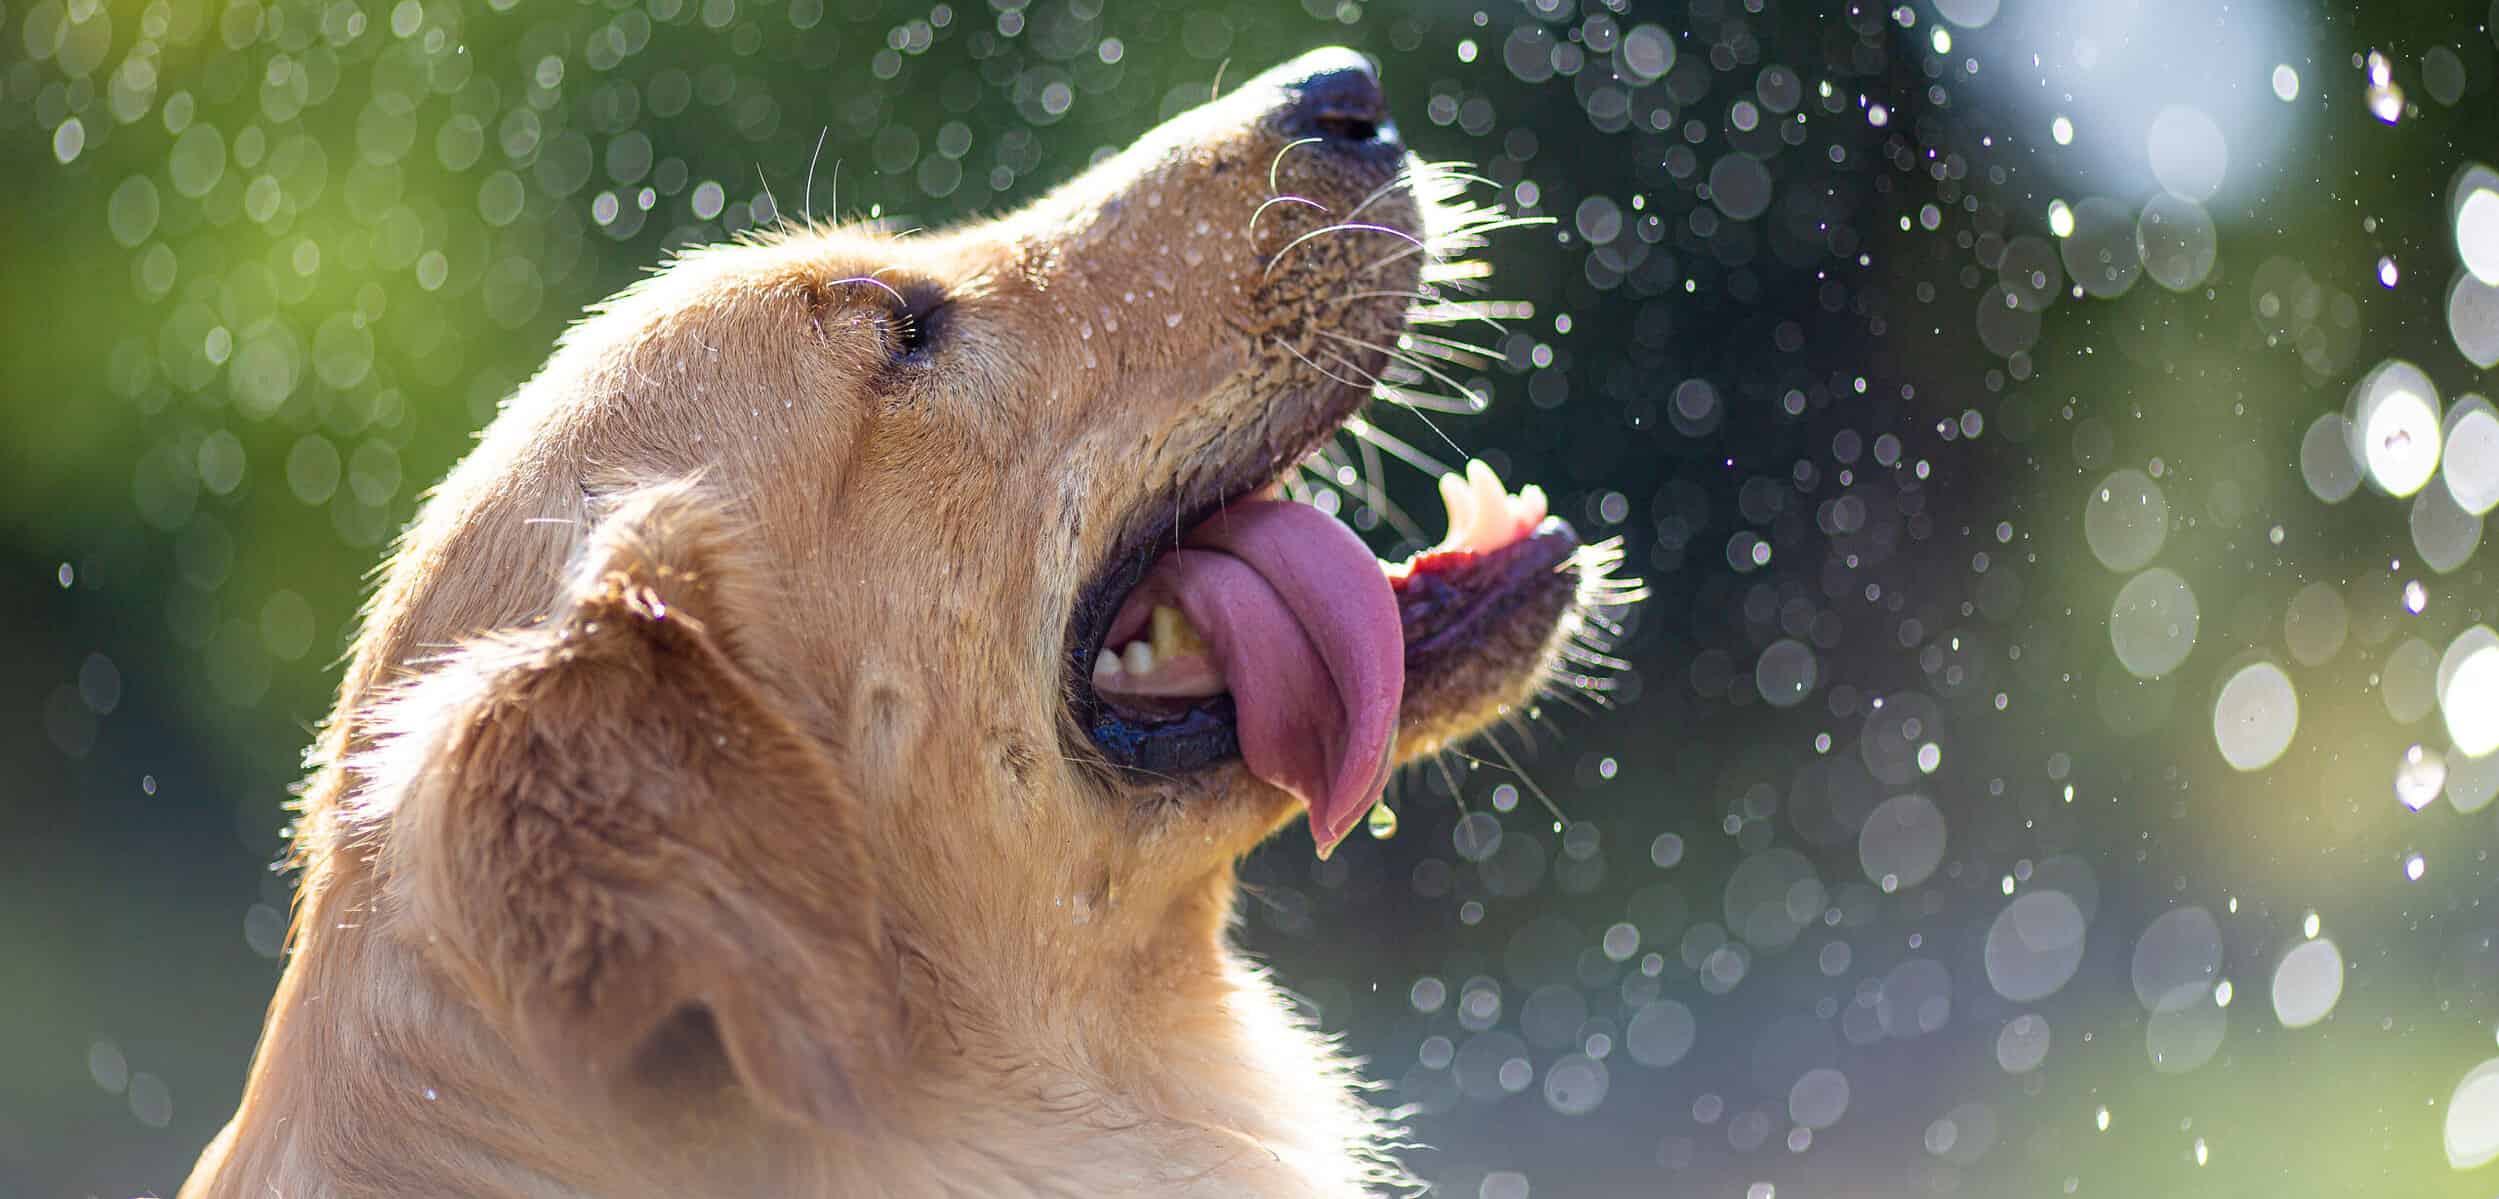 a close up of a dog with its mouth open.